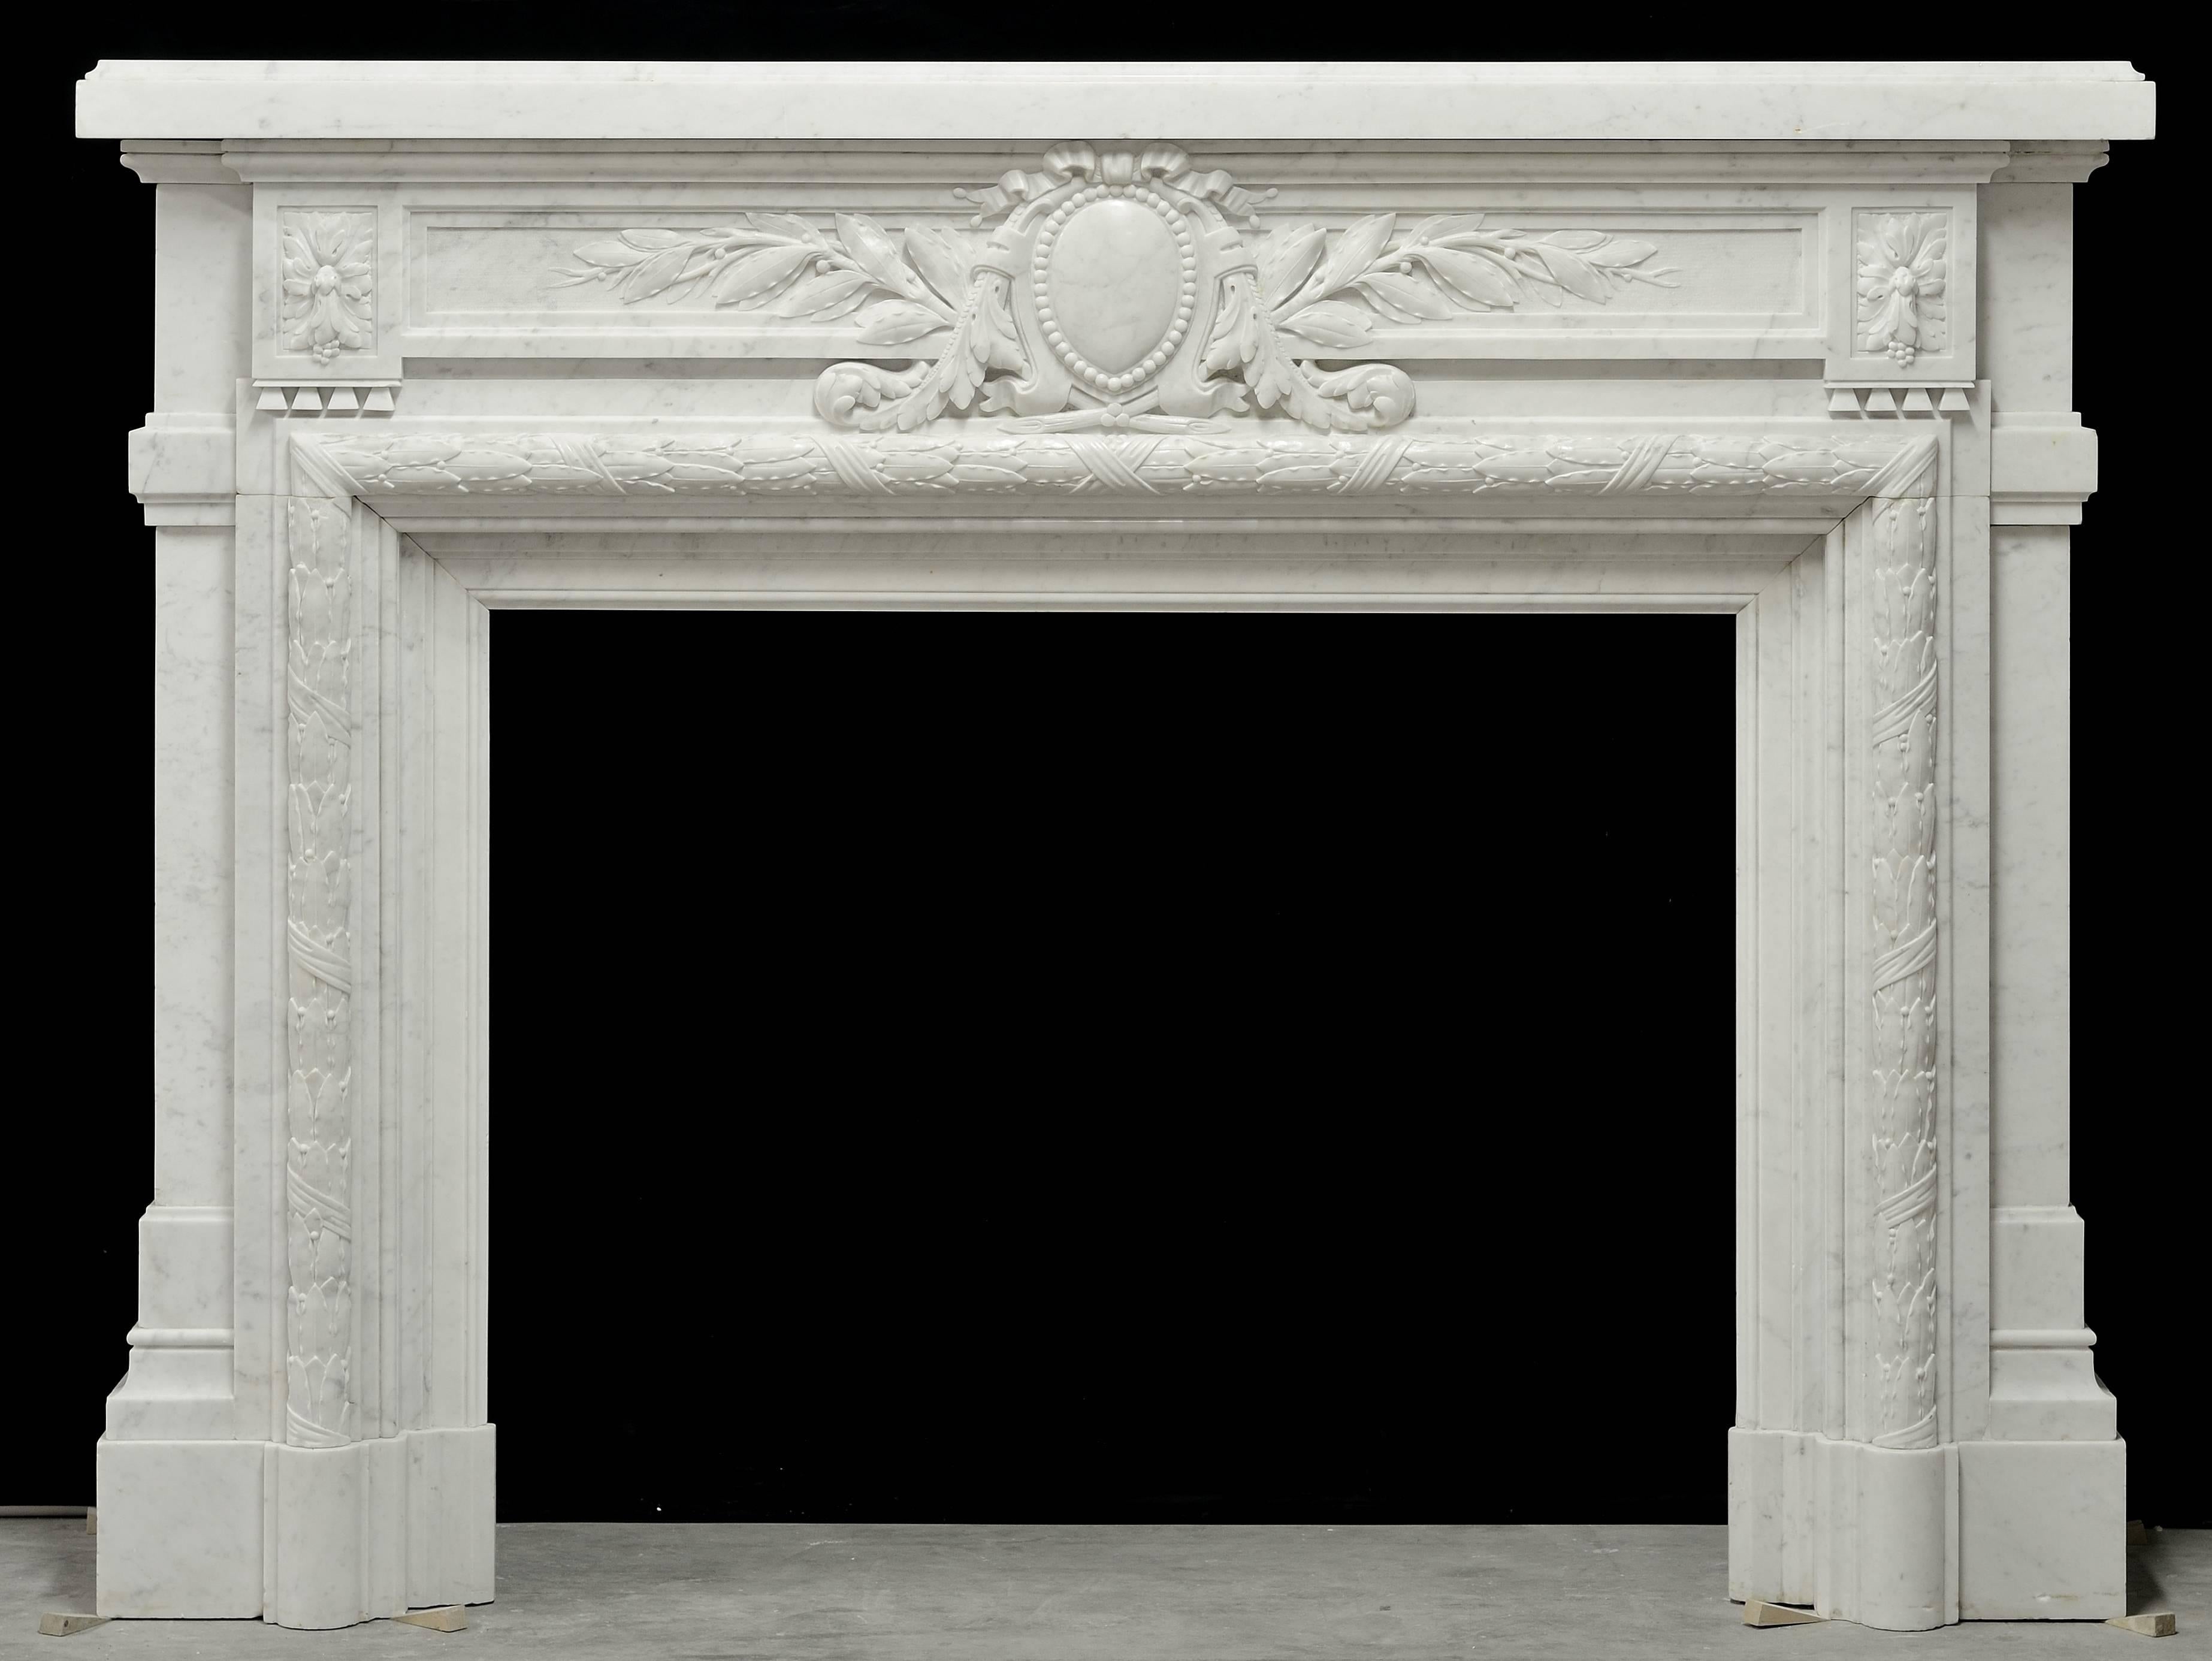 A beautifully carved and unique French Louis XVI style fireplace in Carrara white marble, 19th century.
Perfect, pristine condition. Ready to be installed.

Opening measurements: 36.02 x 44.09 inch. (91.5 x 112 cm) height x width.